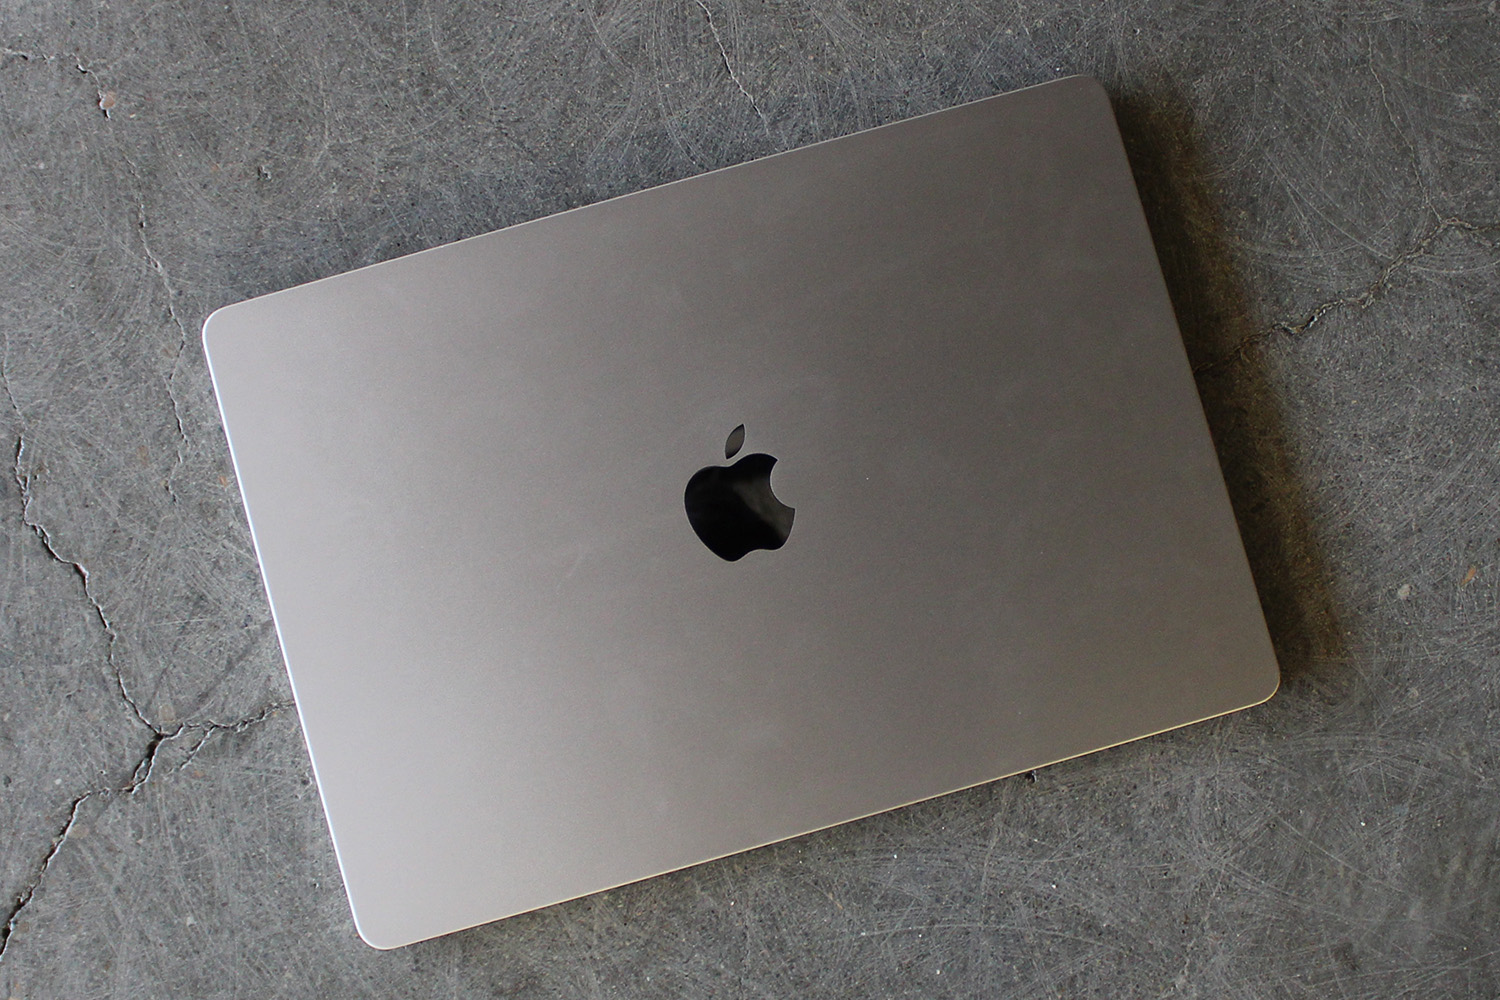 Apple MacBook Air 15-inch review: it's not what you think | Digital Trends